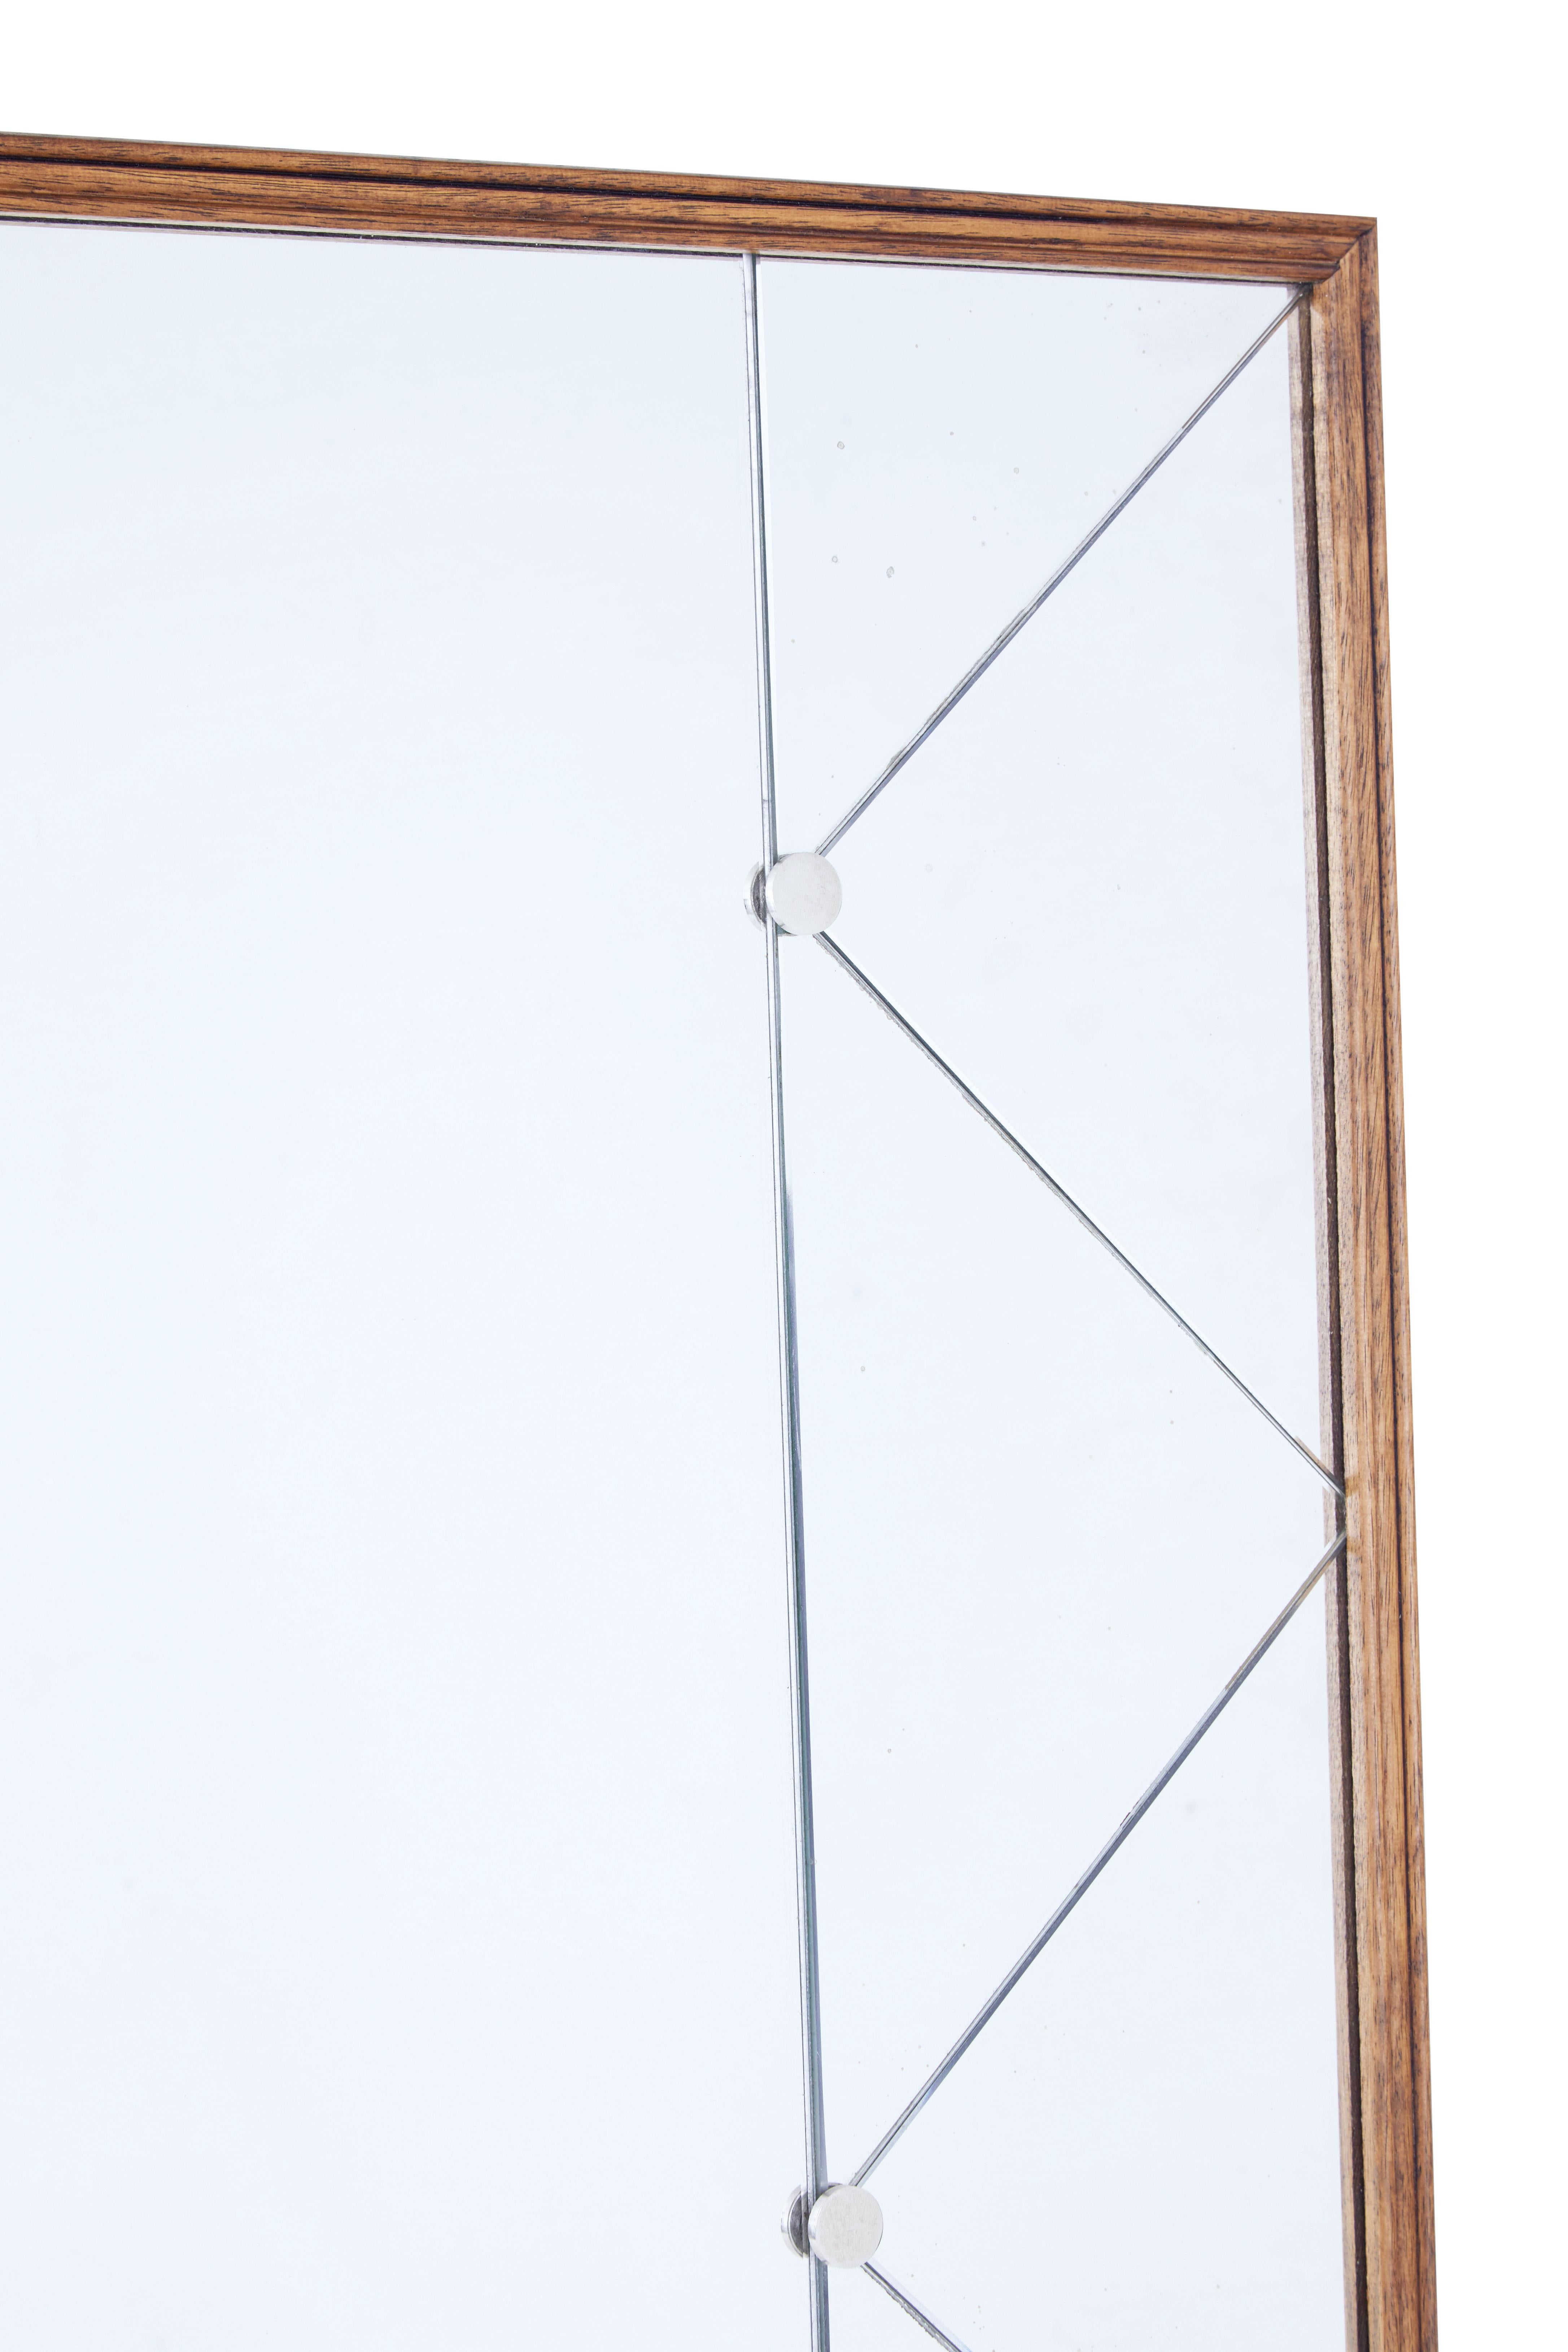 Large and impressive deco inspired mirror, circa 1950.

Thin oak frame, with central mirror flanked either side by diamond and triangle cut mirror.

Mirror segments held in place by steel studs.